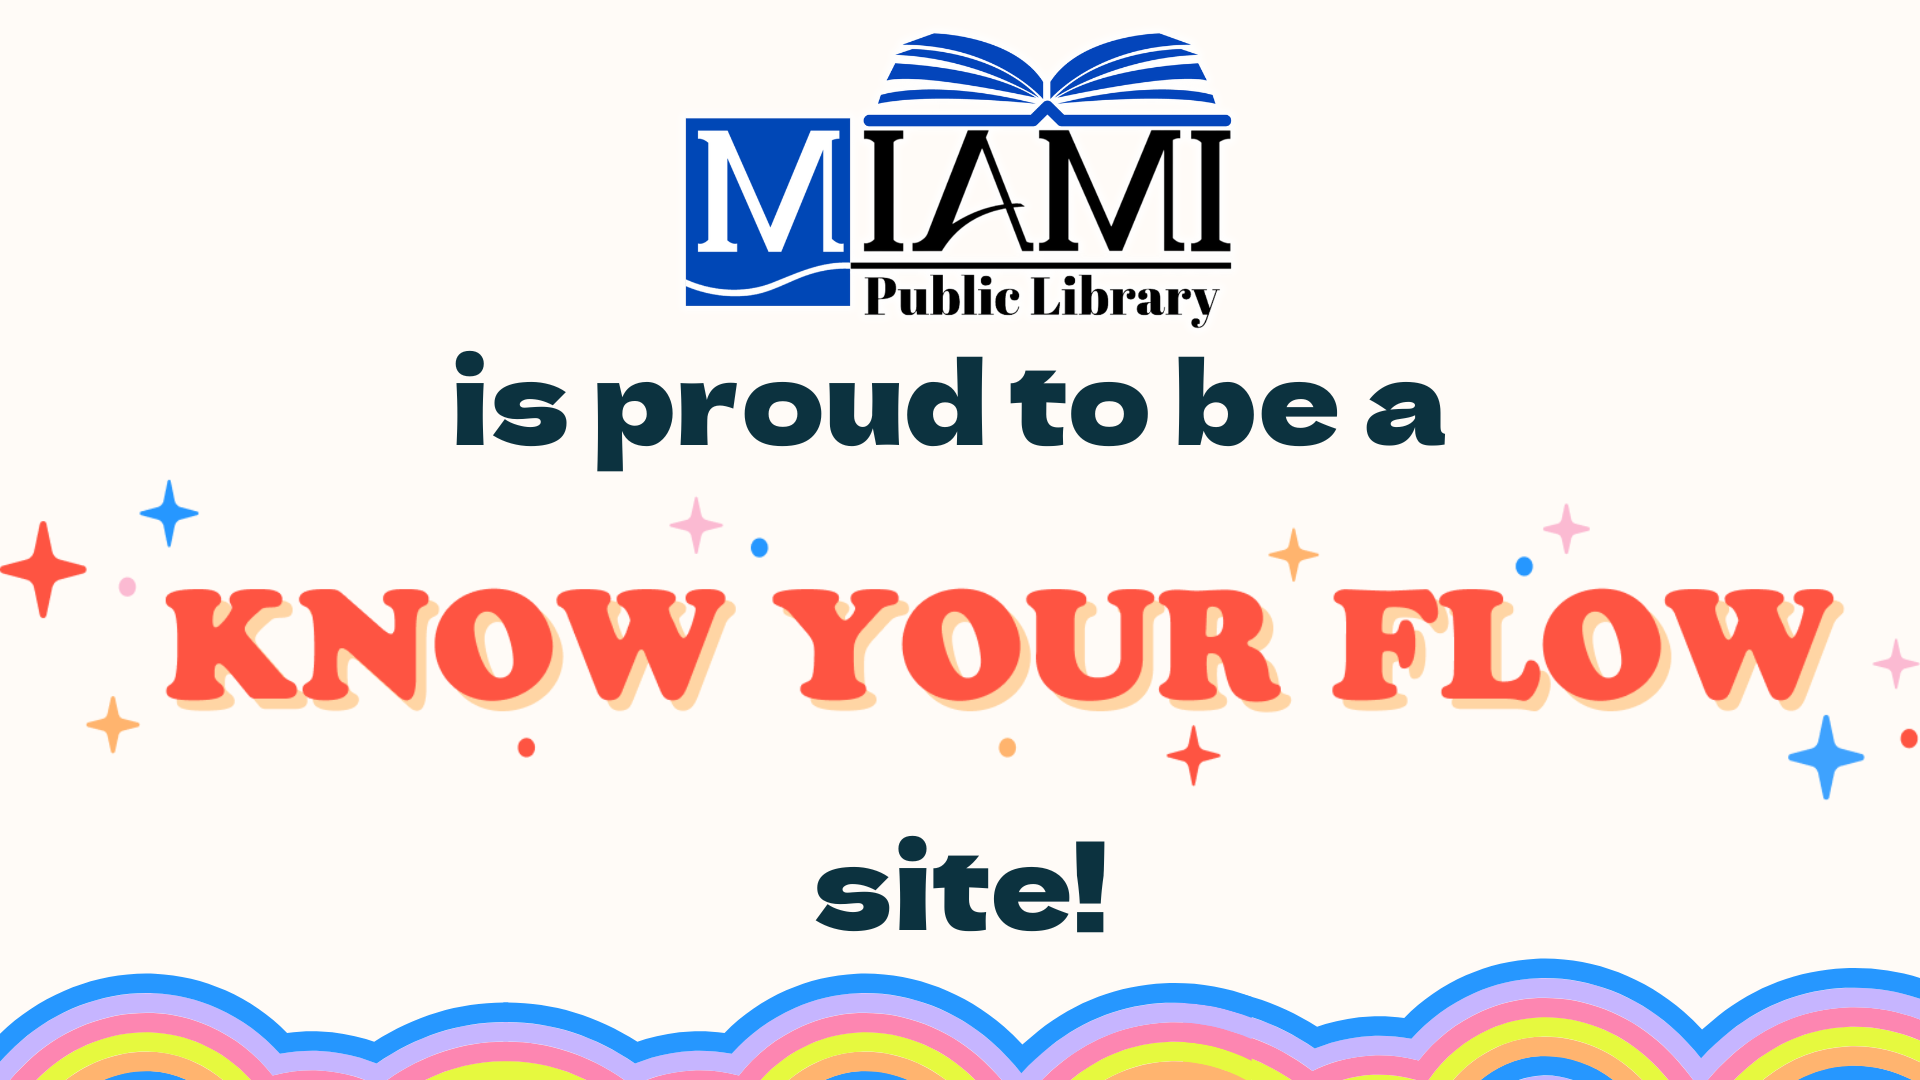 Miami Public Library is proud to be a know your flow site